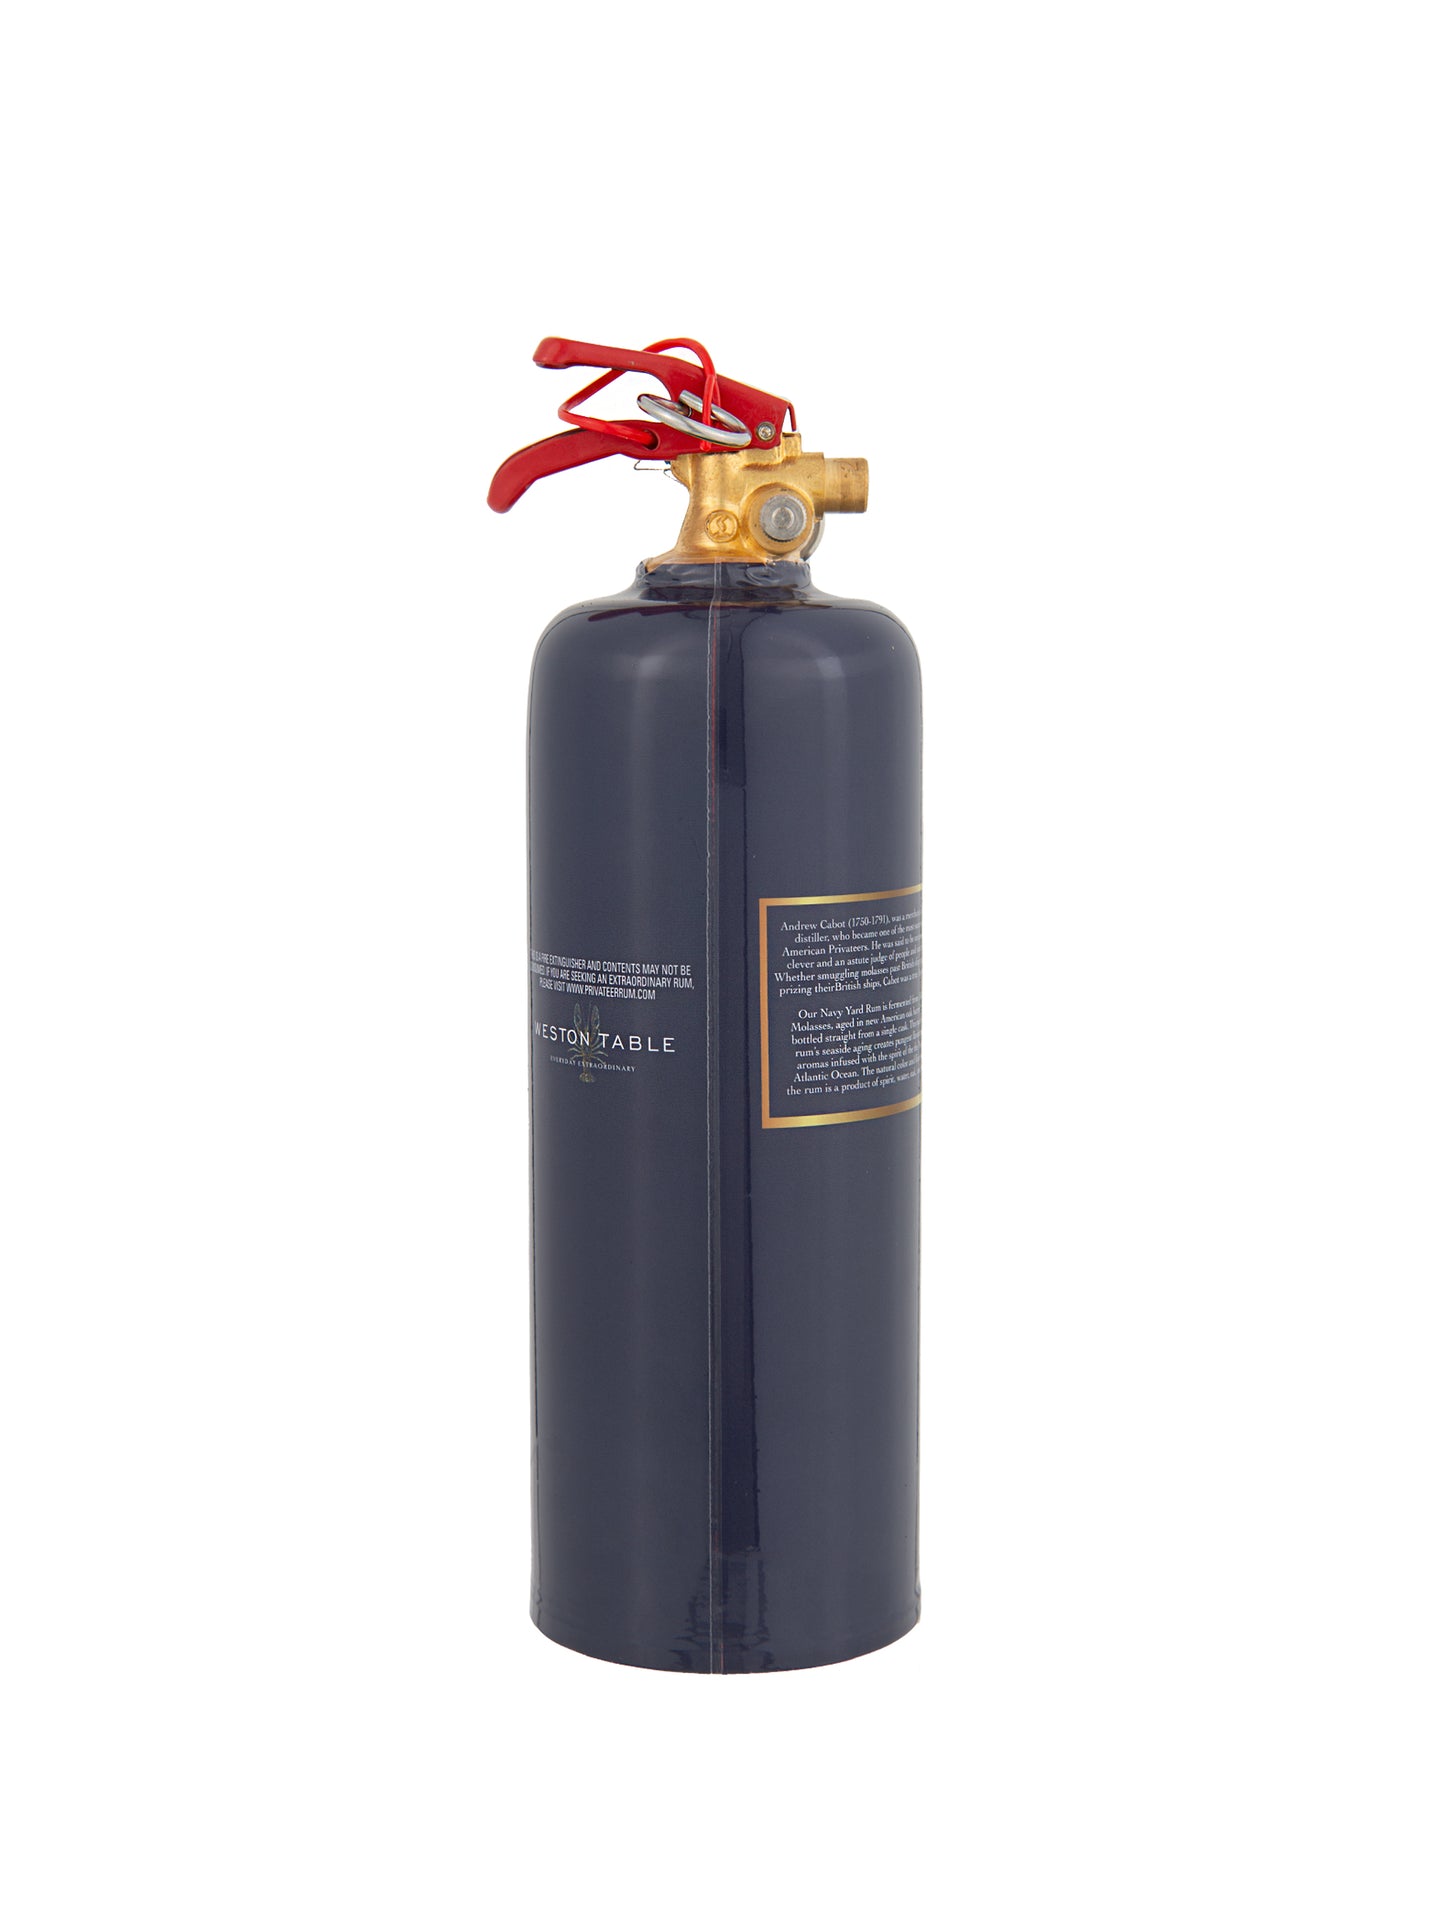 WT Privateer Fire Extinguisher Weston Table